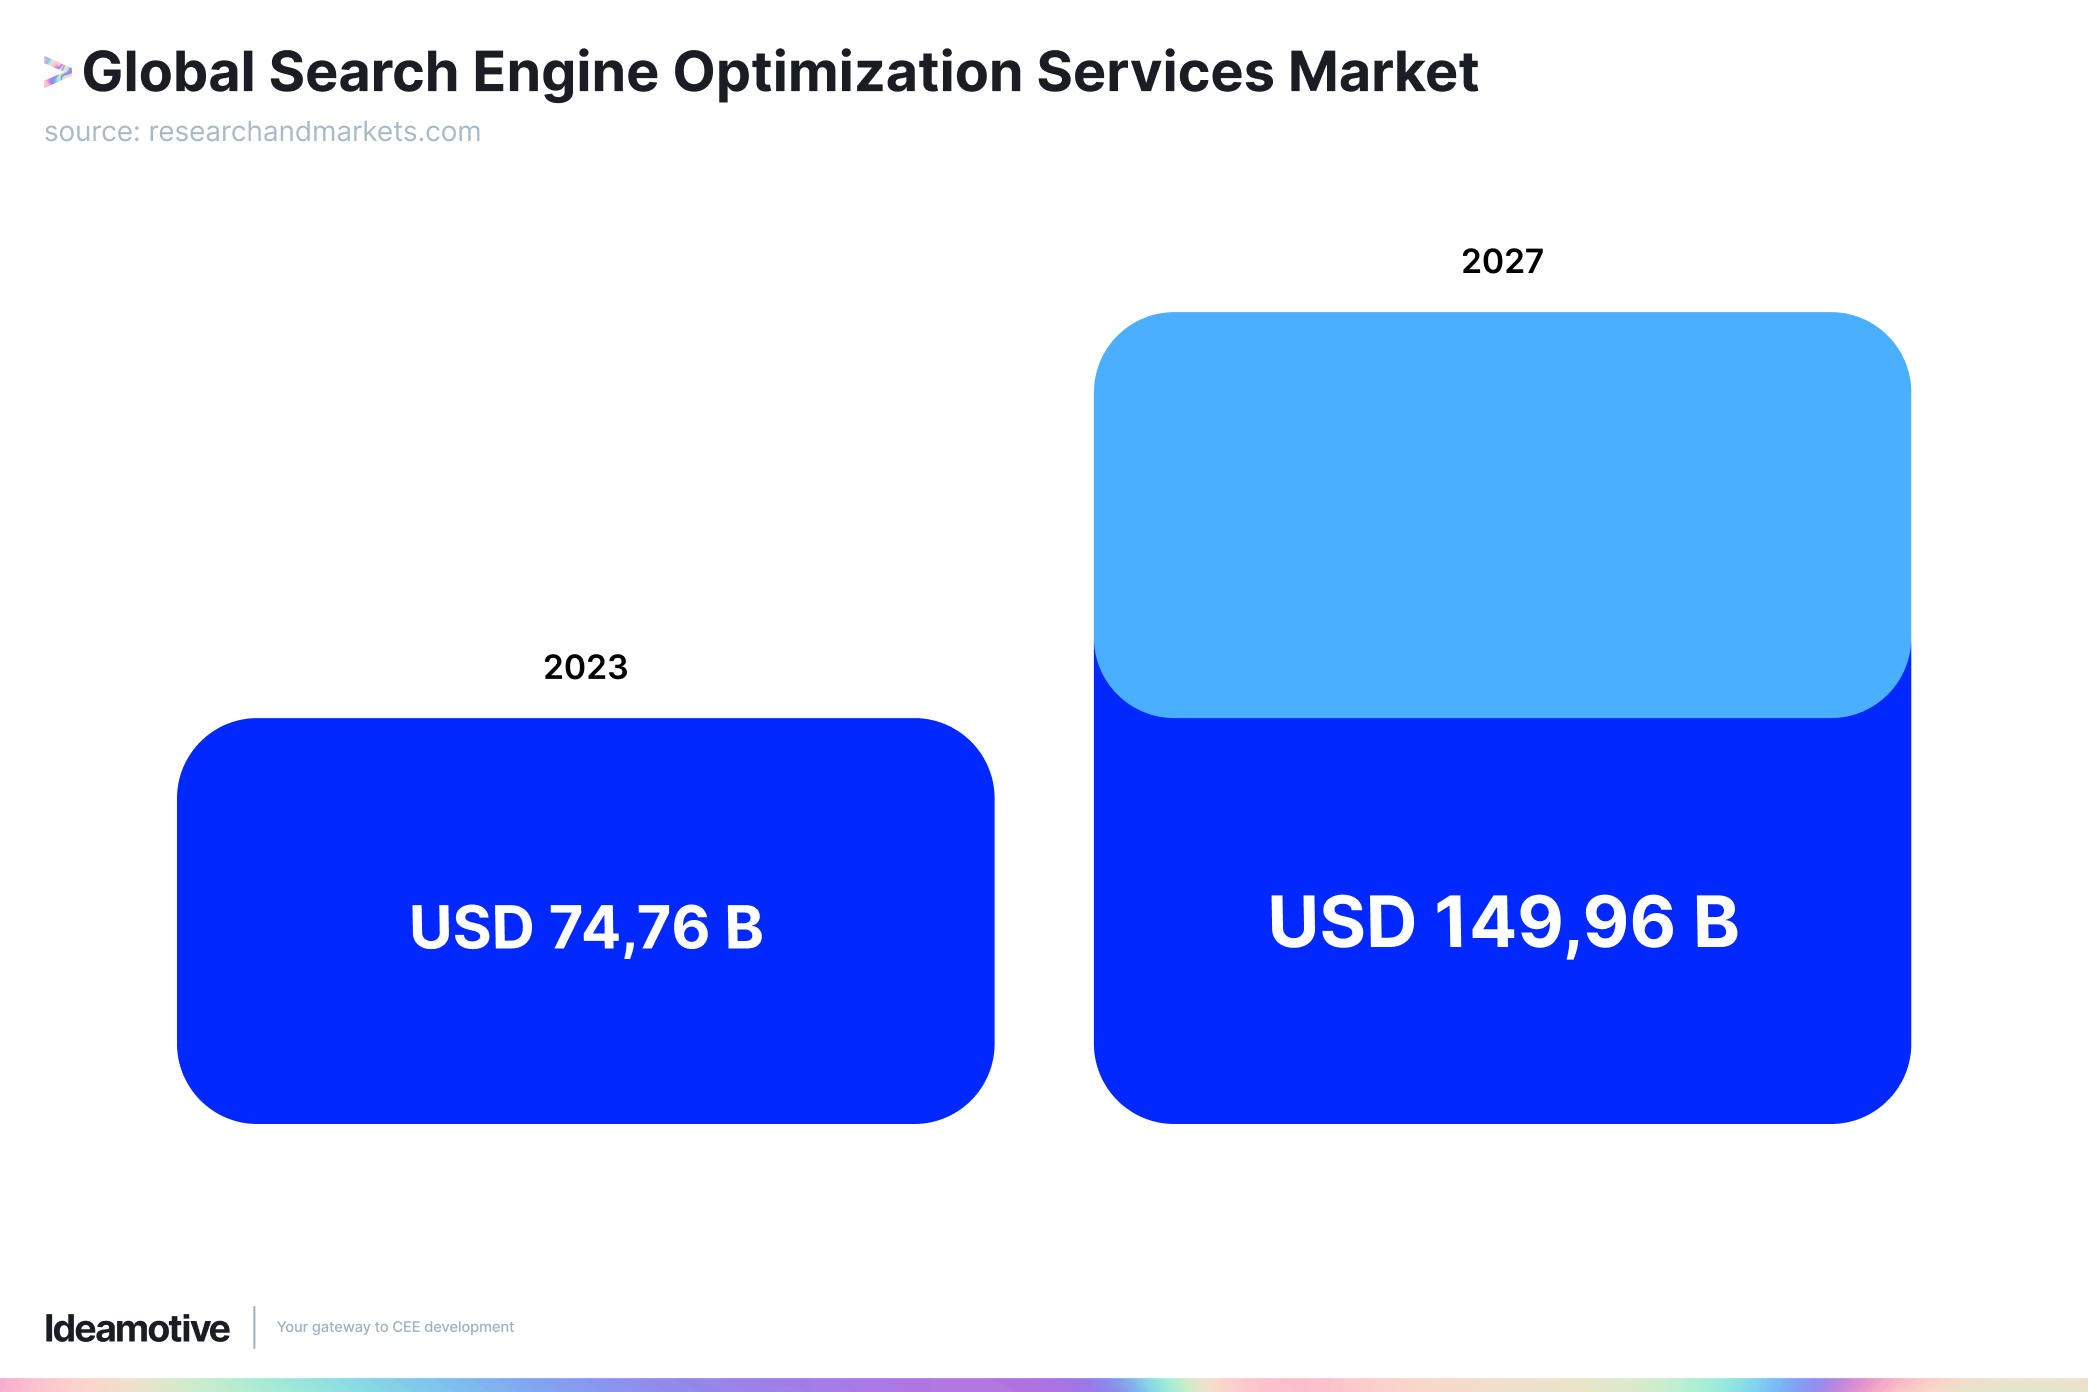 Global Search Engine Optimization Services Market